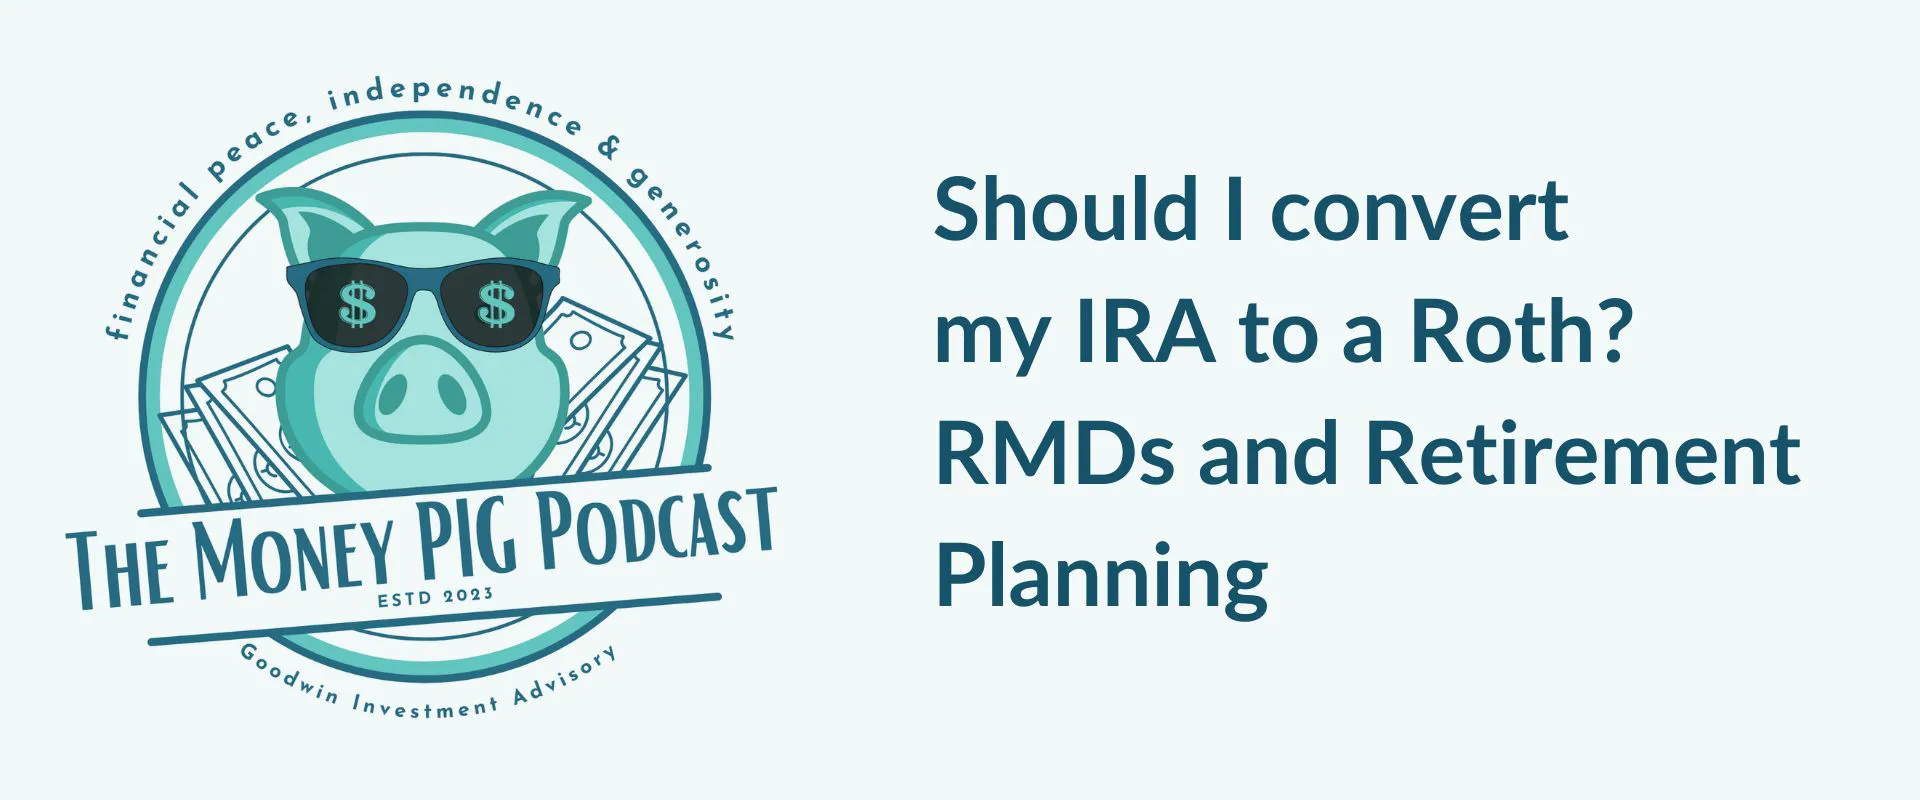 Should I convert my IRA to a Roth? RMDs and Retirement Planning